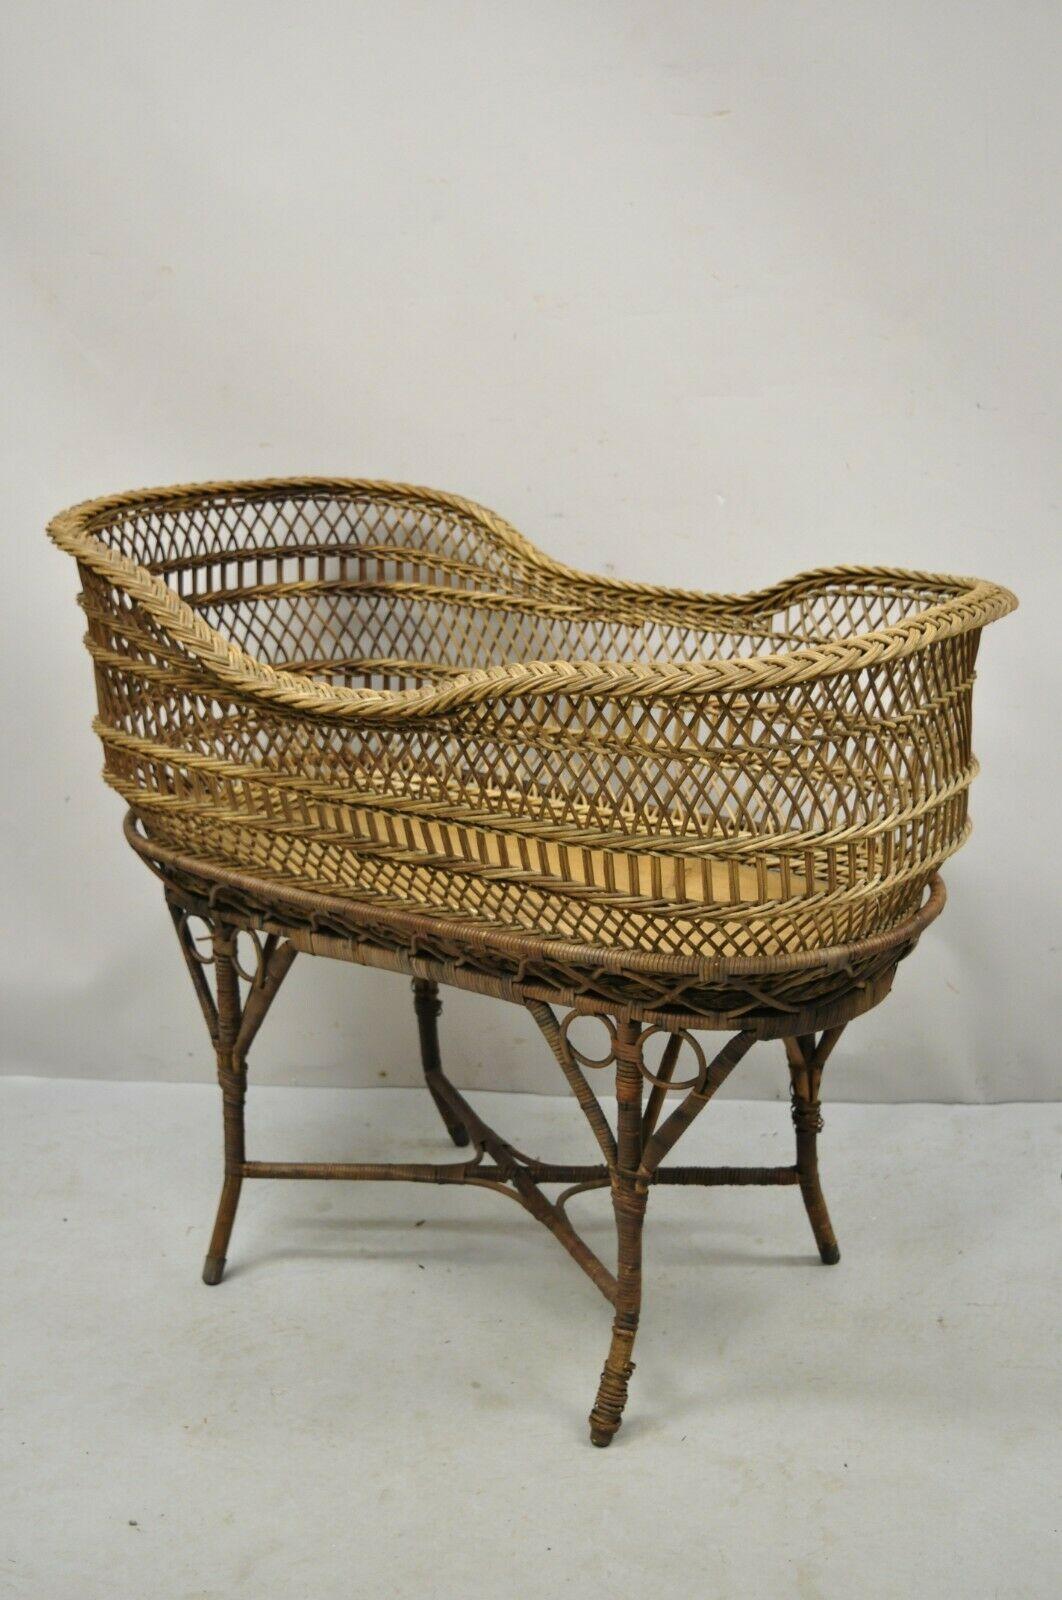 Antique Victorian Rattan and Wicker Baby Bassinet Cradle. Item features solid wood frame, very nice antique item, rattan wrapped base, removable wicker bassinet, stretcher base, canopy frame (not attached), solid wood frame, very nice antique item.